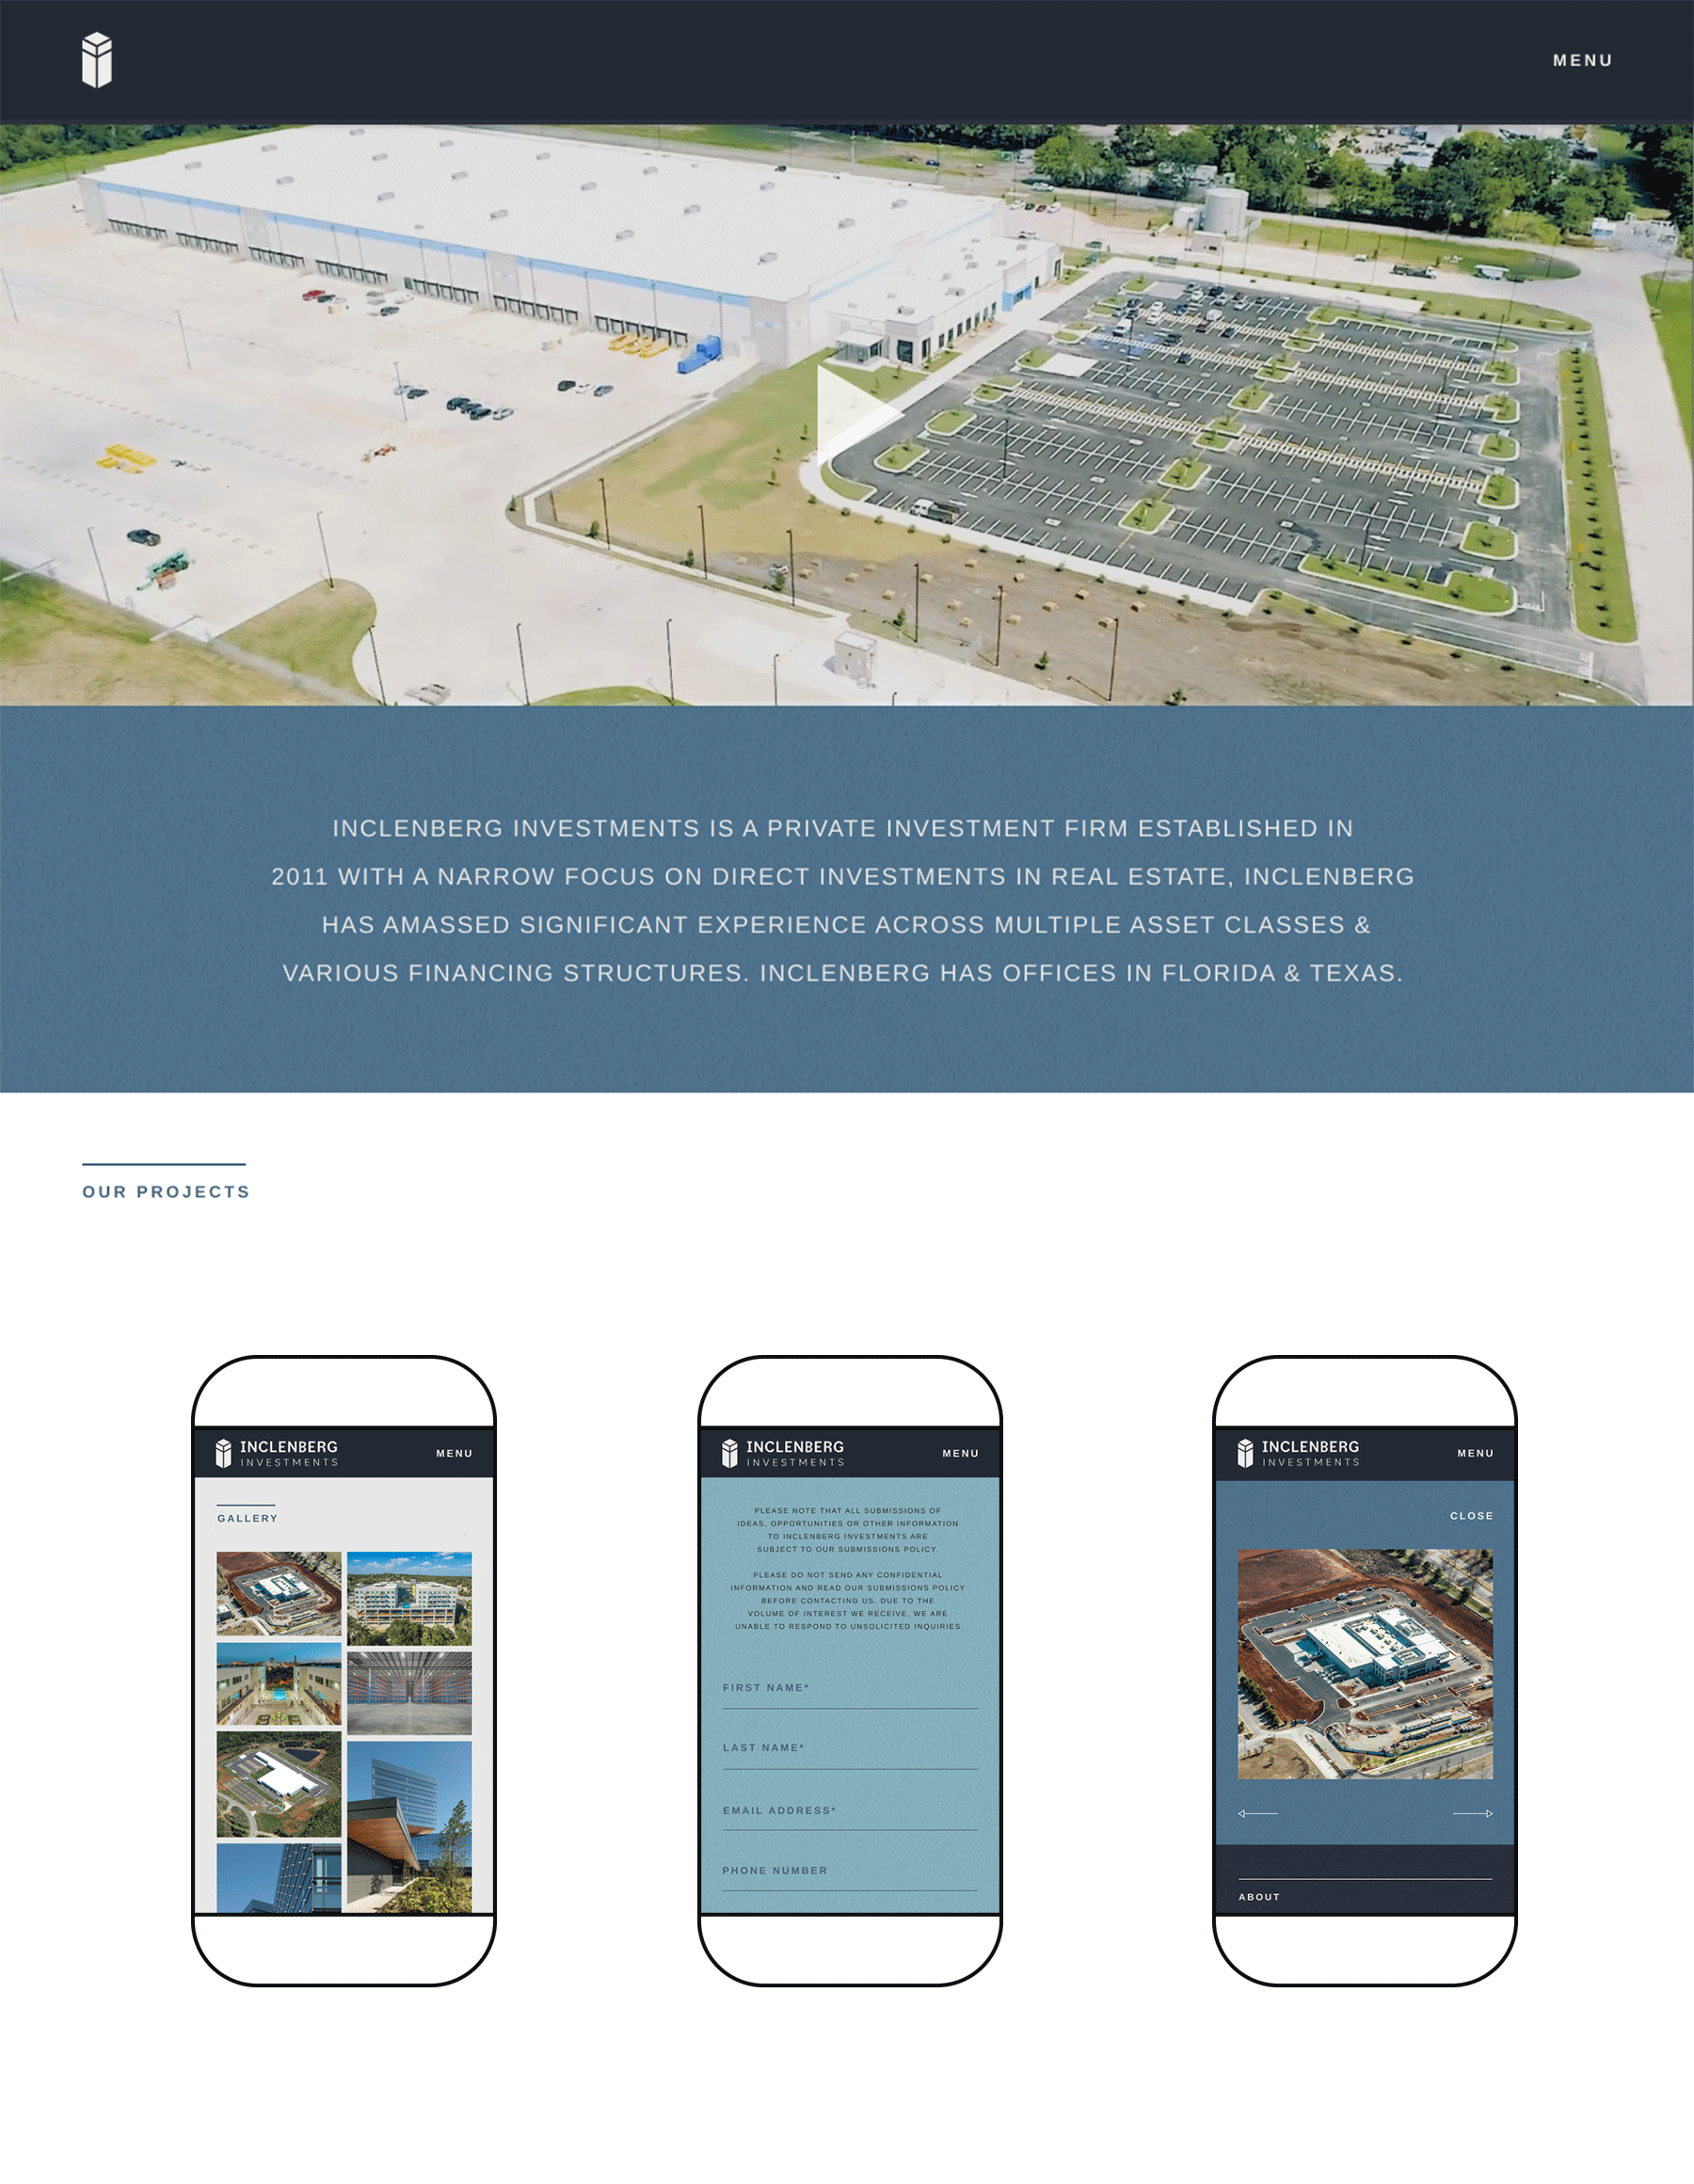 Scrolling GIF of large display of Inclenberg Investments website about page, and 3 side-by-side mobile mockups of the gallery & contact pages.